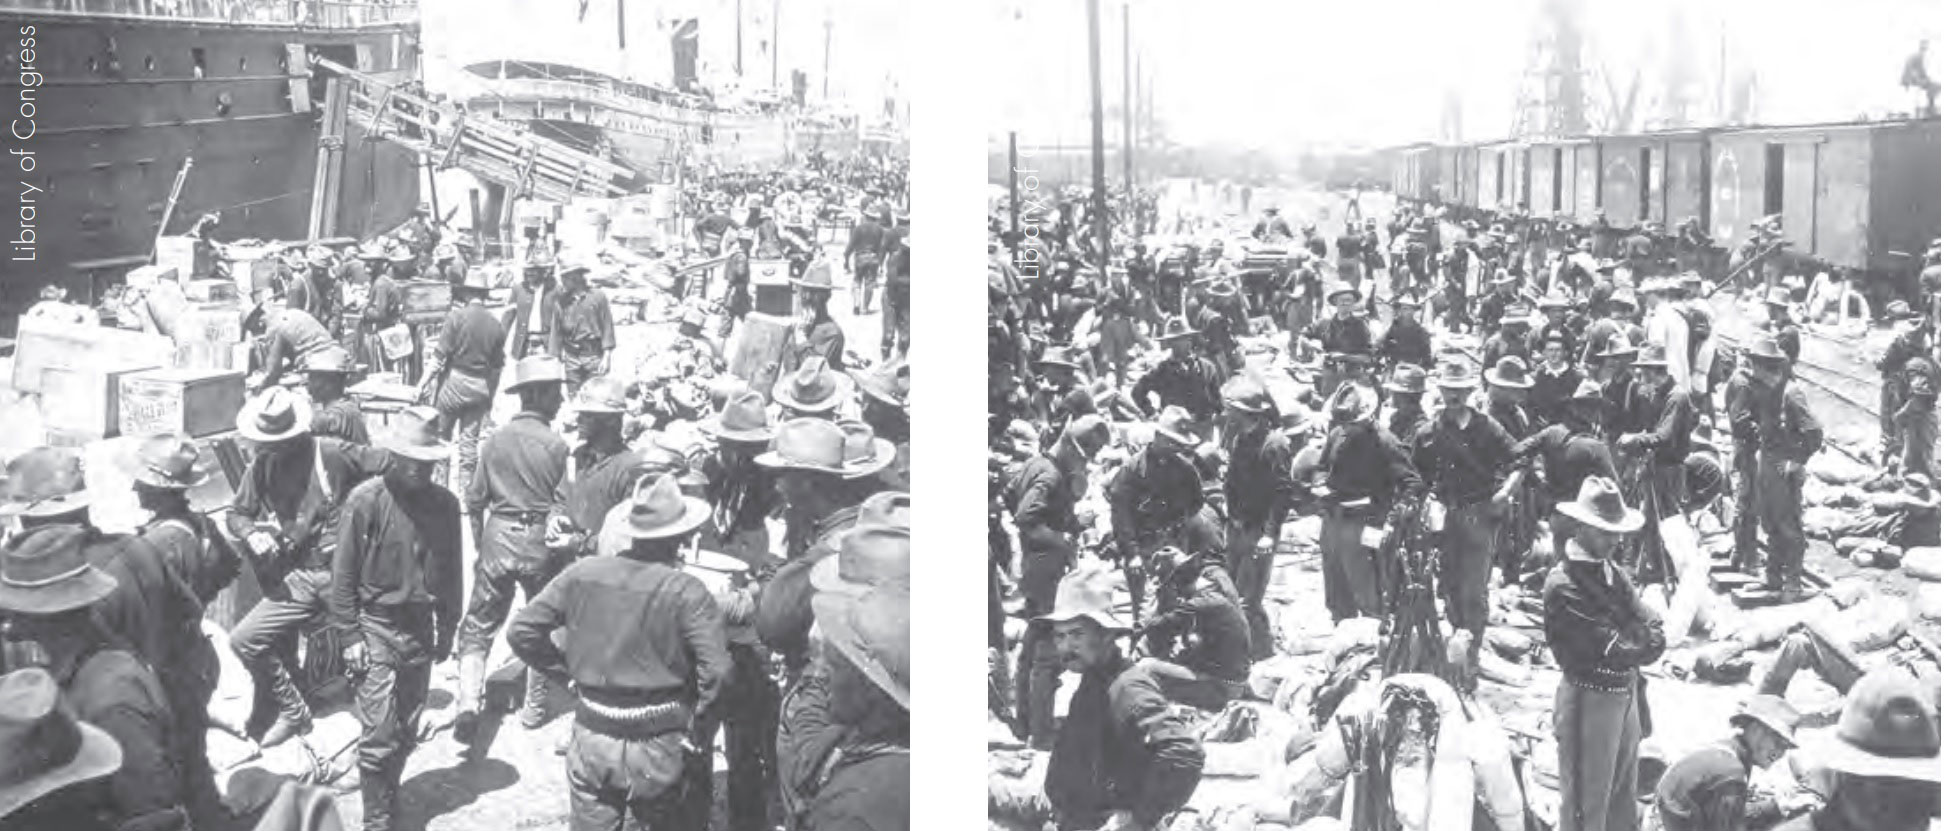 Image left: U.S. soldiers in Tampa await the order to board their assigned ships before sailing for Cuba, June 1898. Image right: Members of the 71st New York Volunteer Infantry gather on the dock in Tampa before sailing for Cuba, June 1898.